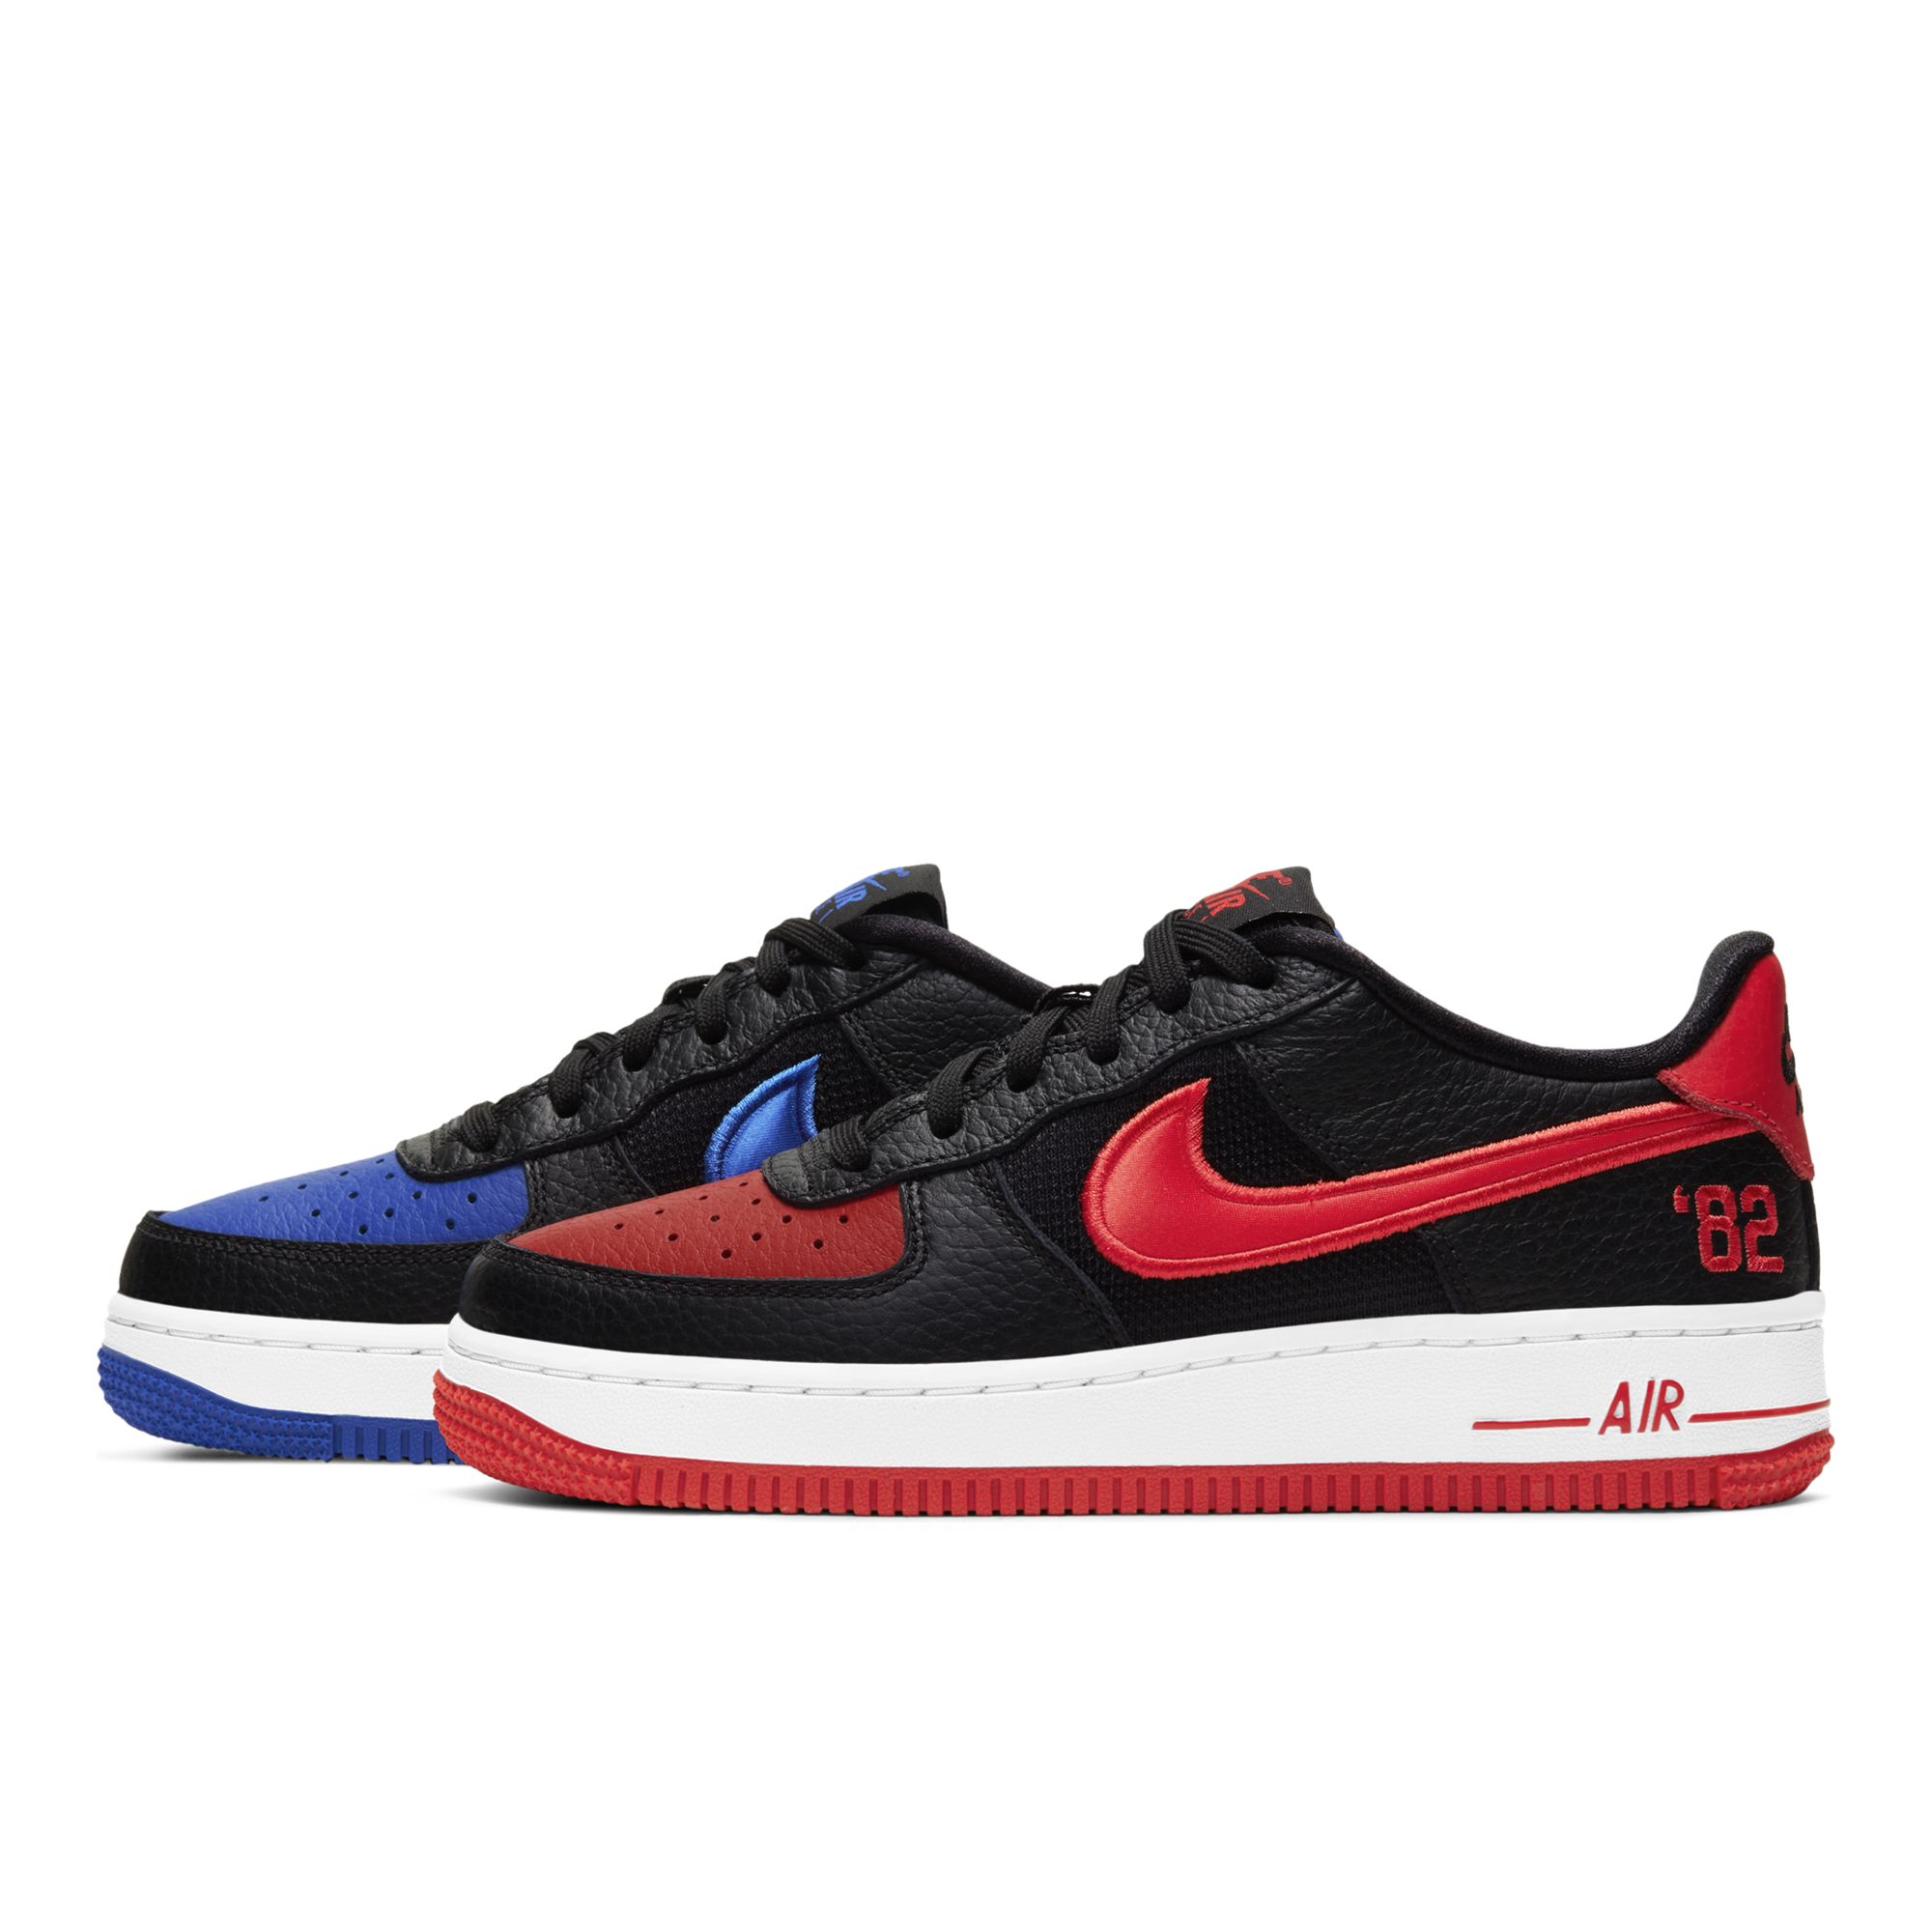 red and blue nike air force 1 lv8